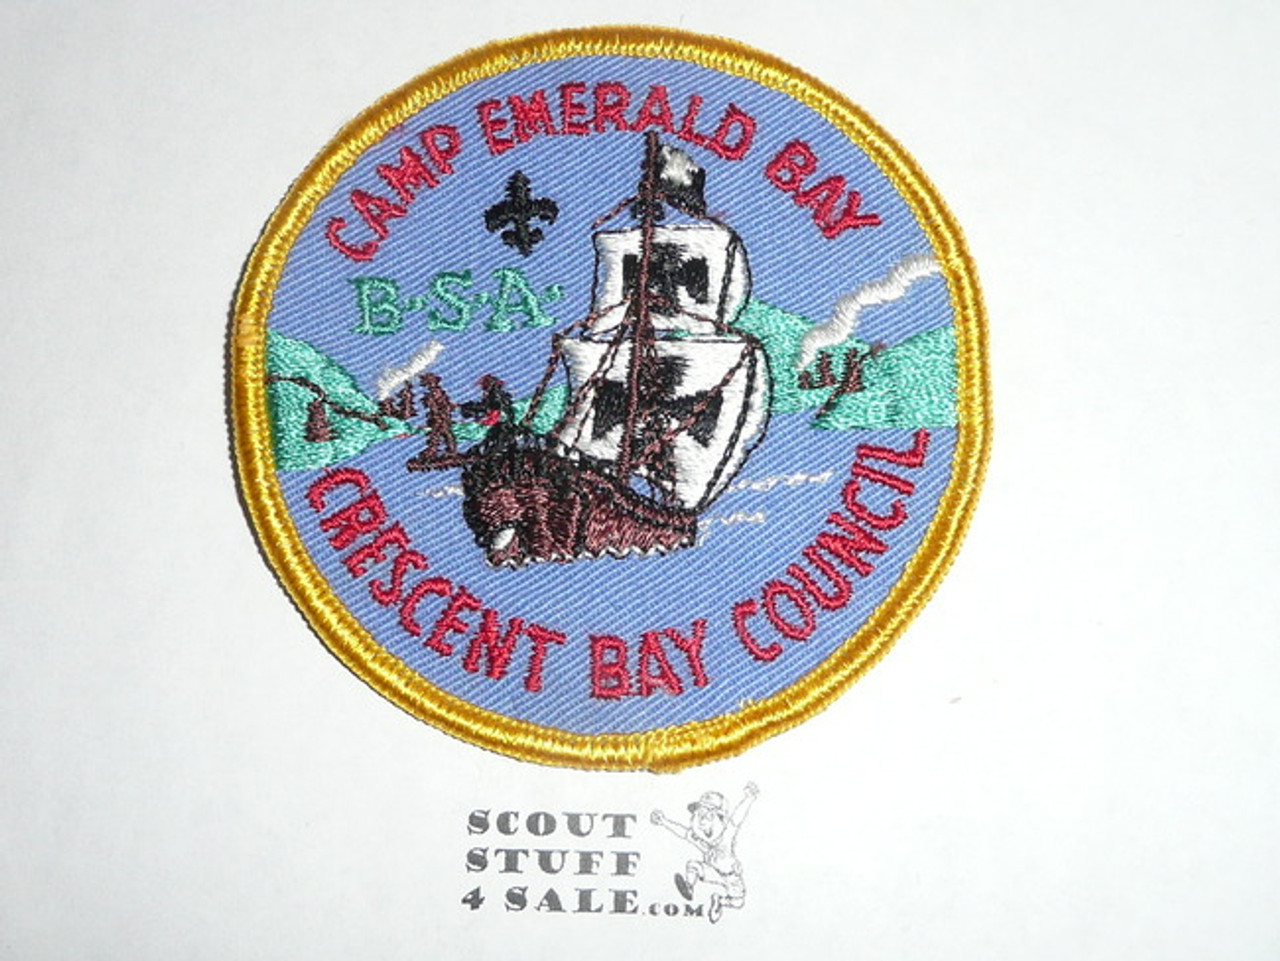 1961-1963 Camp Emerald Bay Patch, flat r/e variety